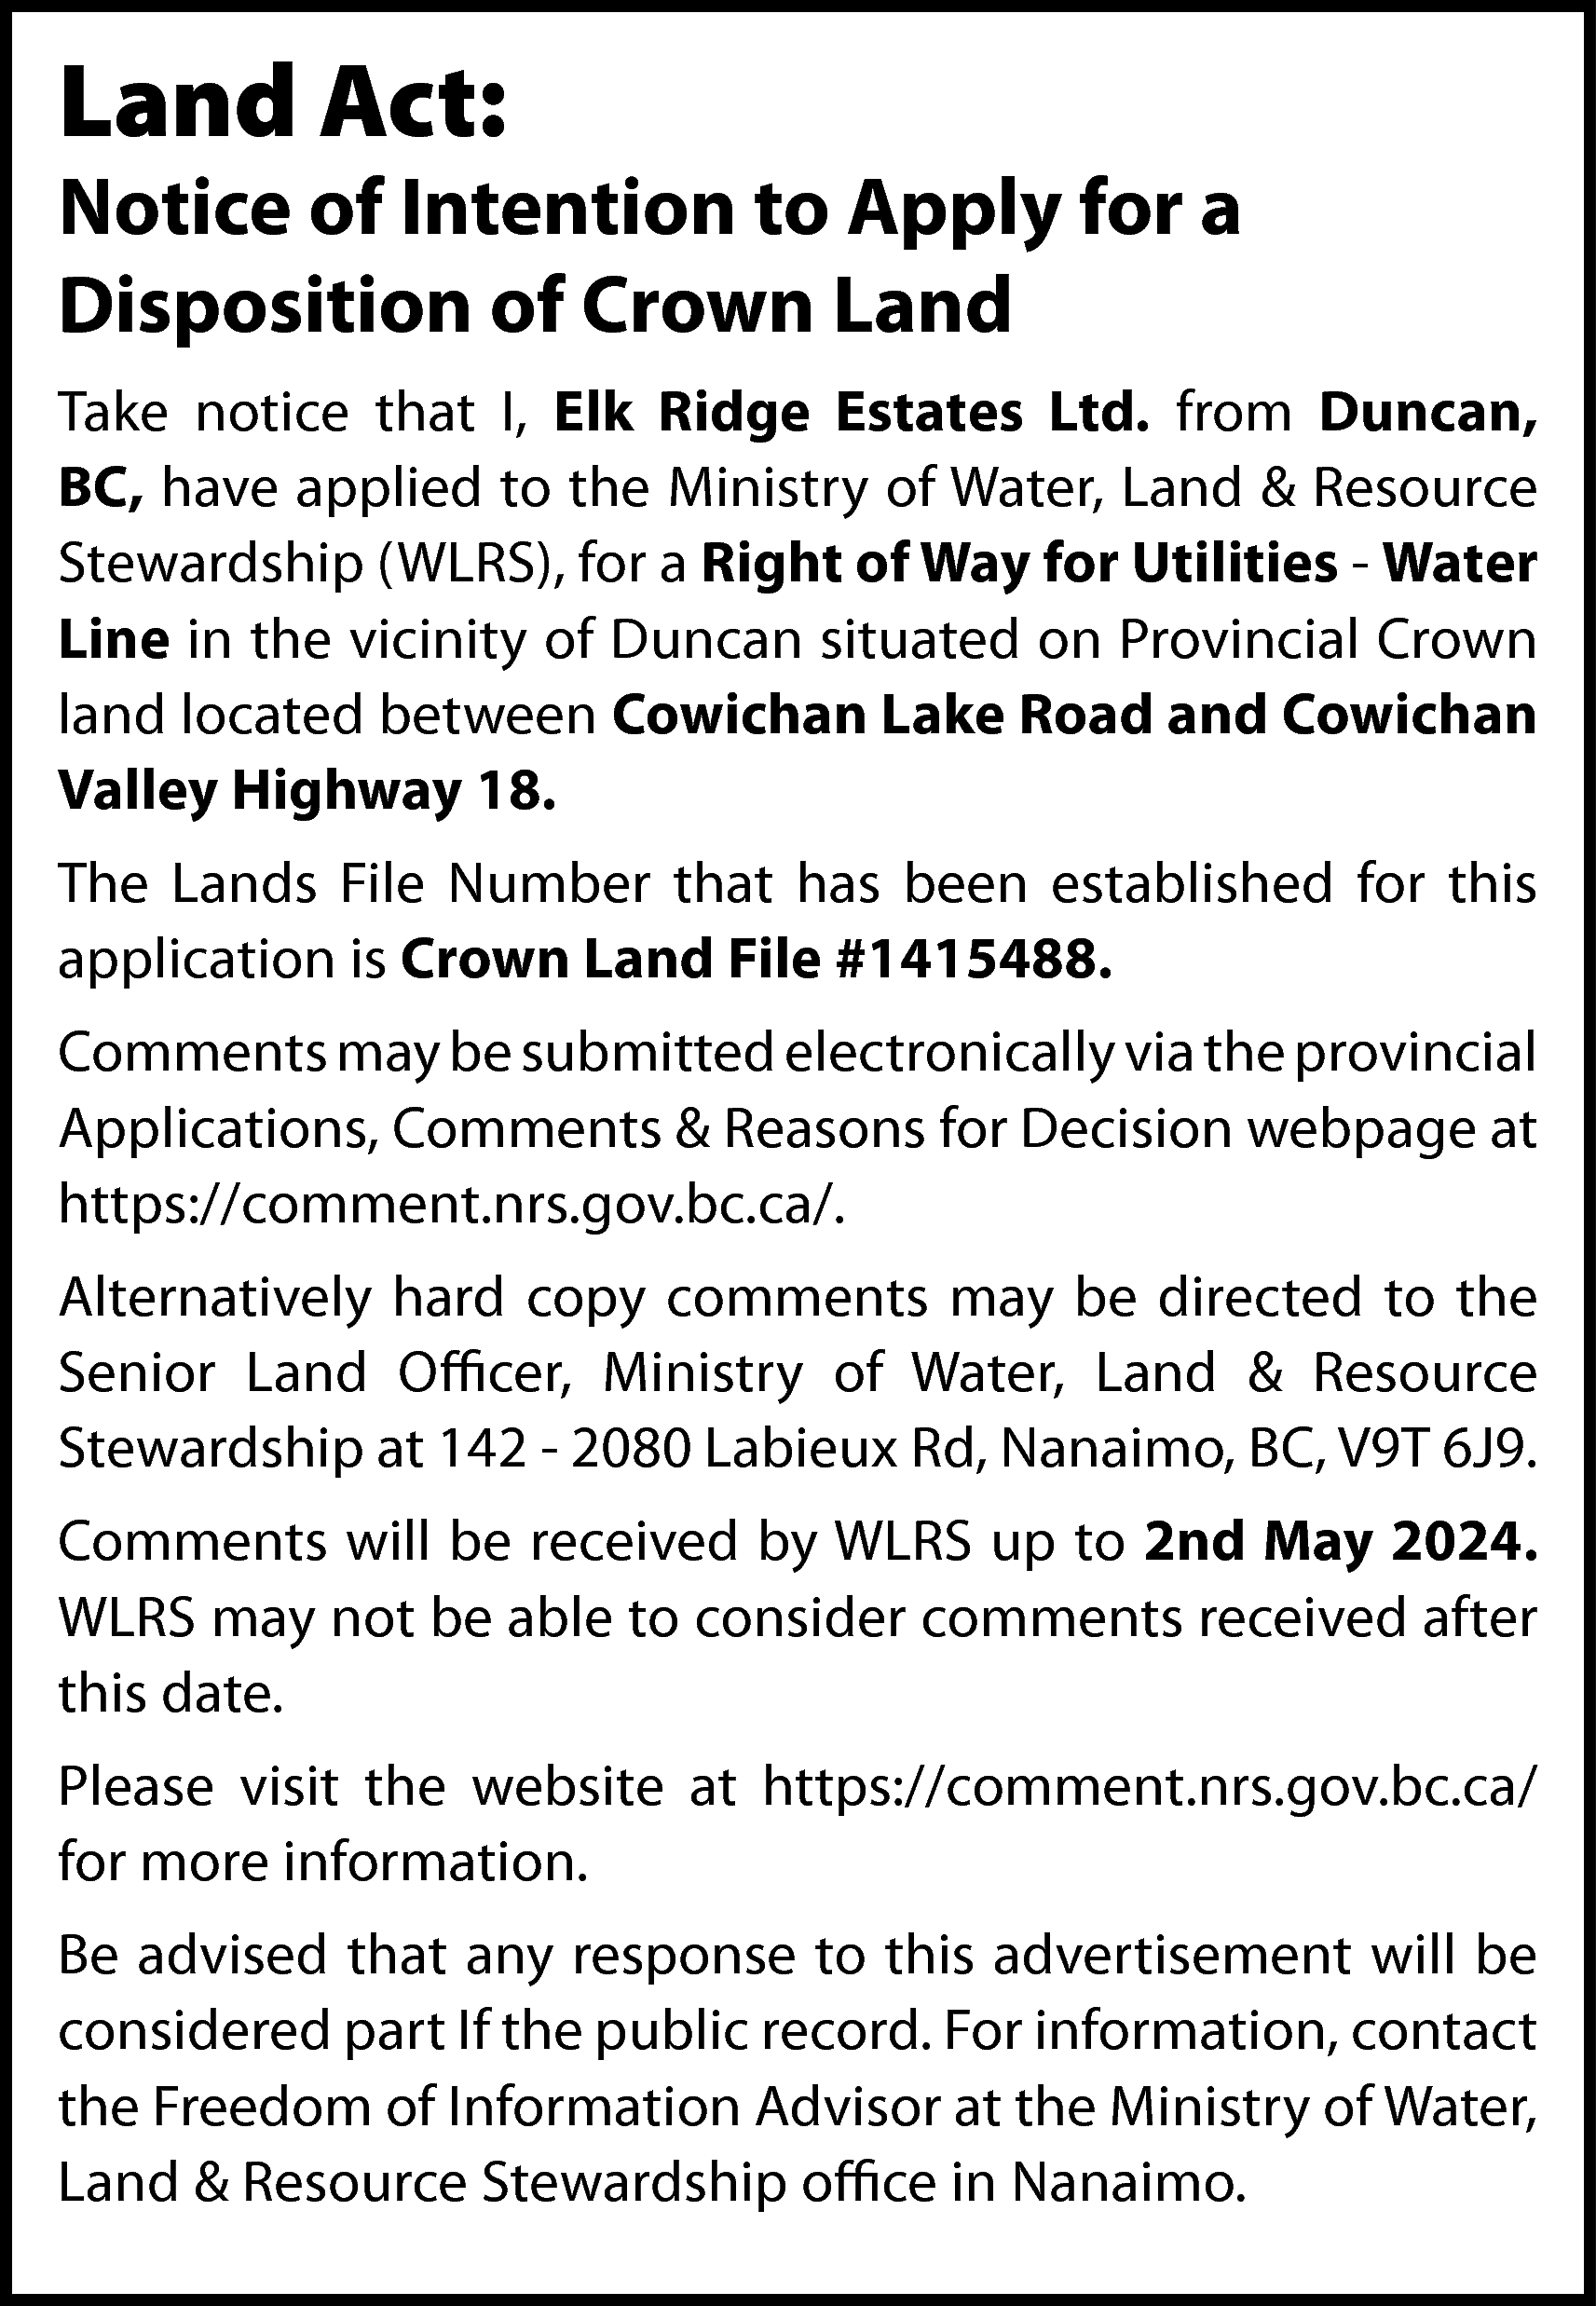 Land Act: <br> <br>Notice of  Land Act:    Notice of Intention to Apply for a  Disposition of Crown Land  Take notice that I, Elk Ridge Estates Ltd. from Duncan,  BC, have applied to the Ministry of Water, Land & Resource  Stewardship (WLRS), for a Right of Way for Utilities - Water  Line in the vicinity of Duncan situated on Provincial Crown  land located between Cowichan Lake Road and Cowichan  Valley Highway 18.  The Lands File Number that has been established for this  application is Crown Land File #1415488.  Comments may be submitted electronically via the provincial  Applications, Comments & Reasons for Decision webpage at  https://comment.nrs.gov.bc.ca/.  Alternatively hard copy comments may be directed to the  Senior Land Officer, Ministry of Water, Land & Resource  Stewardship at 142 - 2080 Labieux Rd, Nanaimo, BC, V9T 6J9.  Comments will be received by WLRS up to 2nd May 2024.  WLRS may not be able to consider comments received after  this date.  Please visit the website at https://comment.nrs.gov.bc.ca/  for more information.  Be advised that any response to this advertisement will be  considered part If the public record. For information, contact  the Freedom of Information Advisor at the Ministry of Water,  Land & Resource Stewardship office in Nanaimo.    